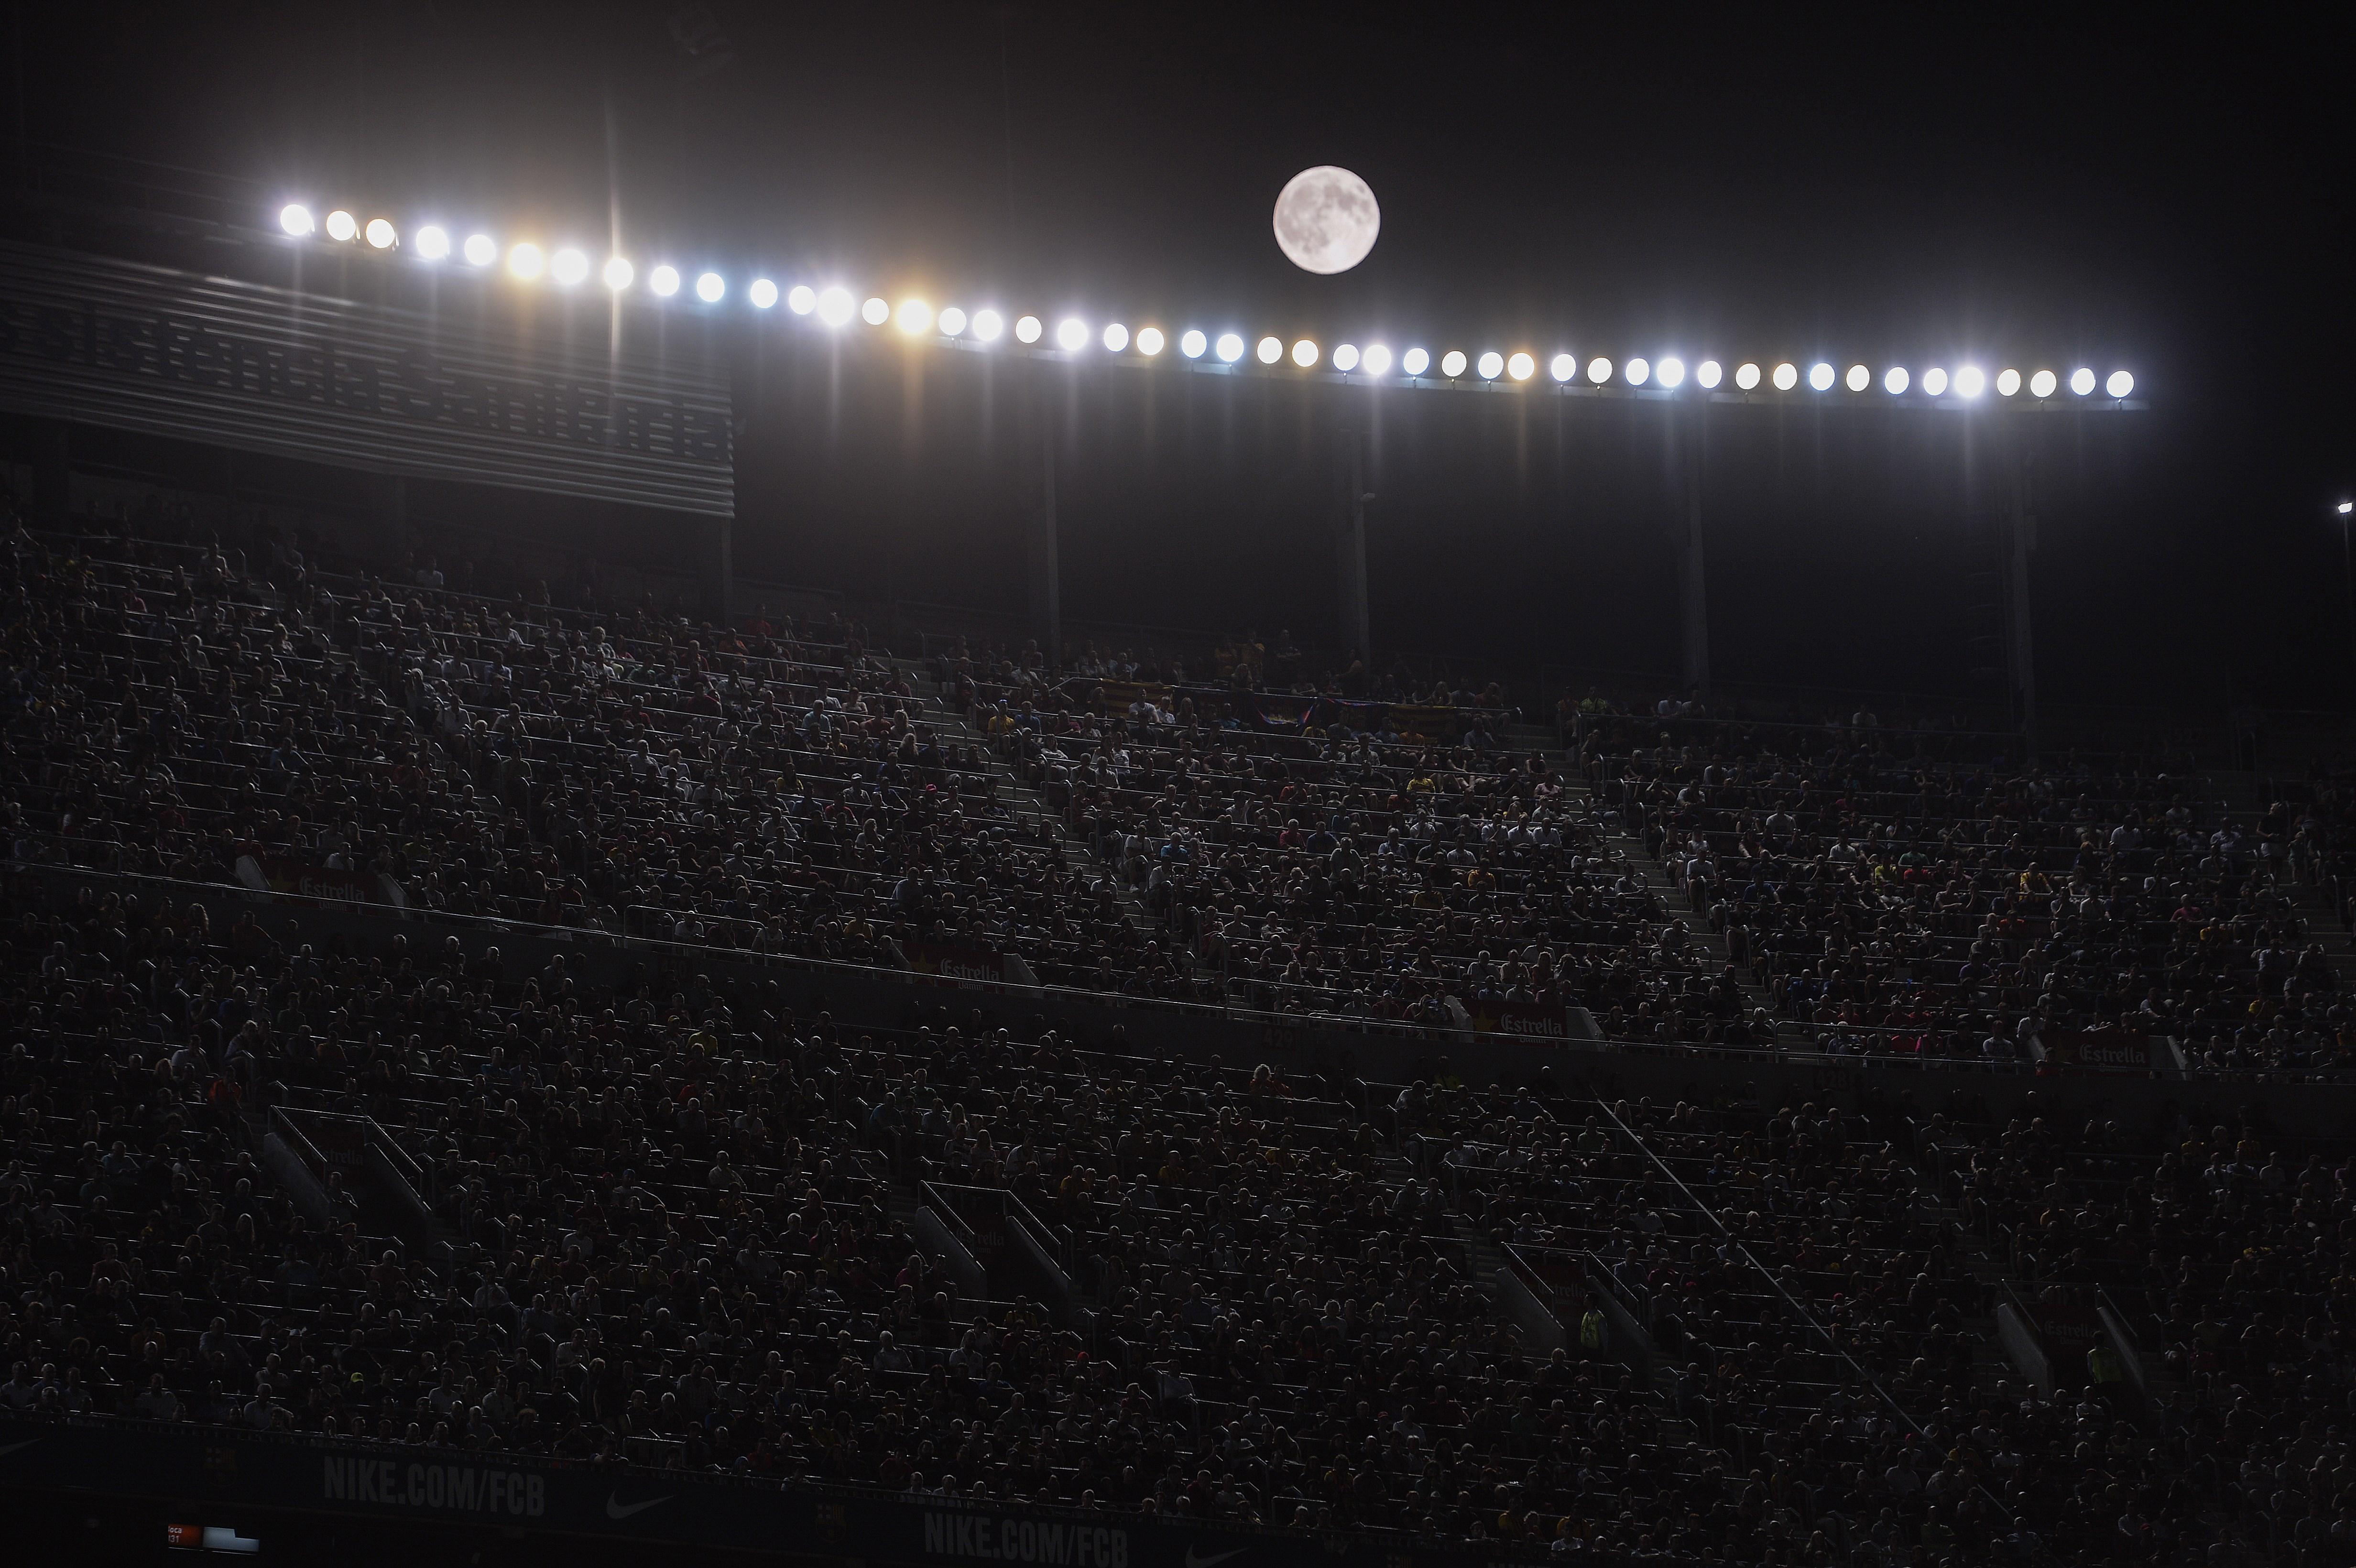 The moon shines during the Spanish league football match FC Barcelona vs. Malaga CF at the Camp Nou stadium in Barcelona on Aug. 29, 2015.